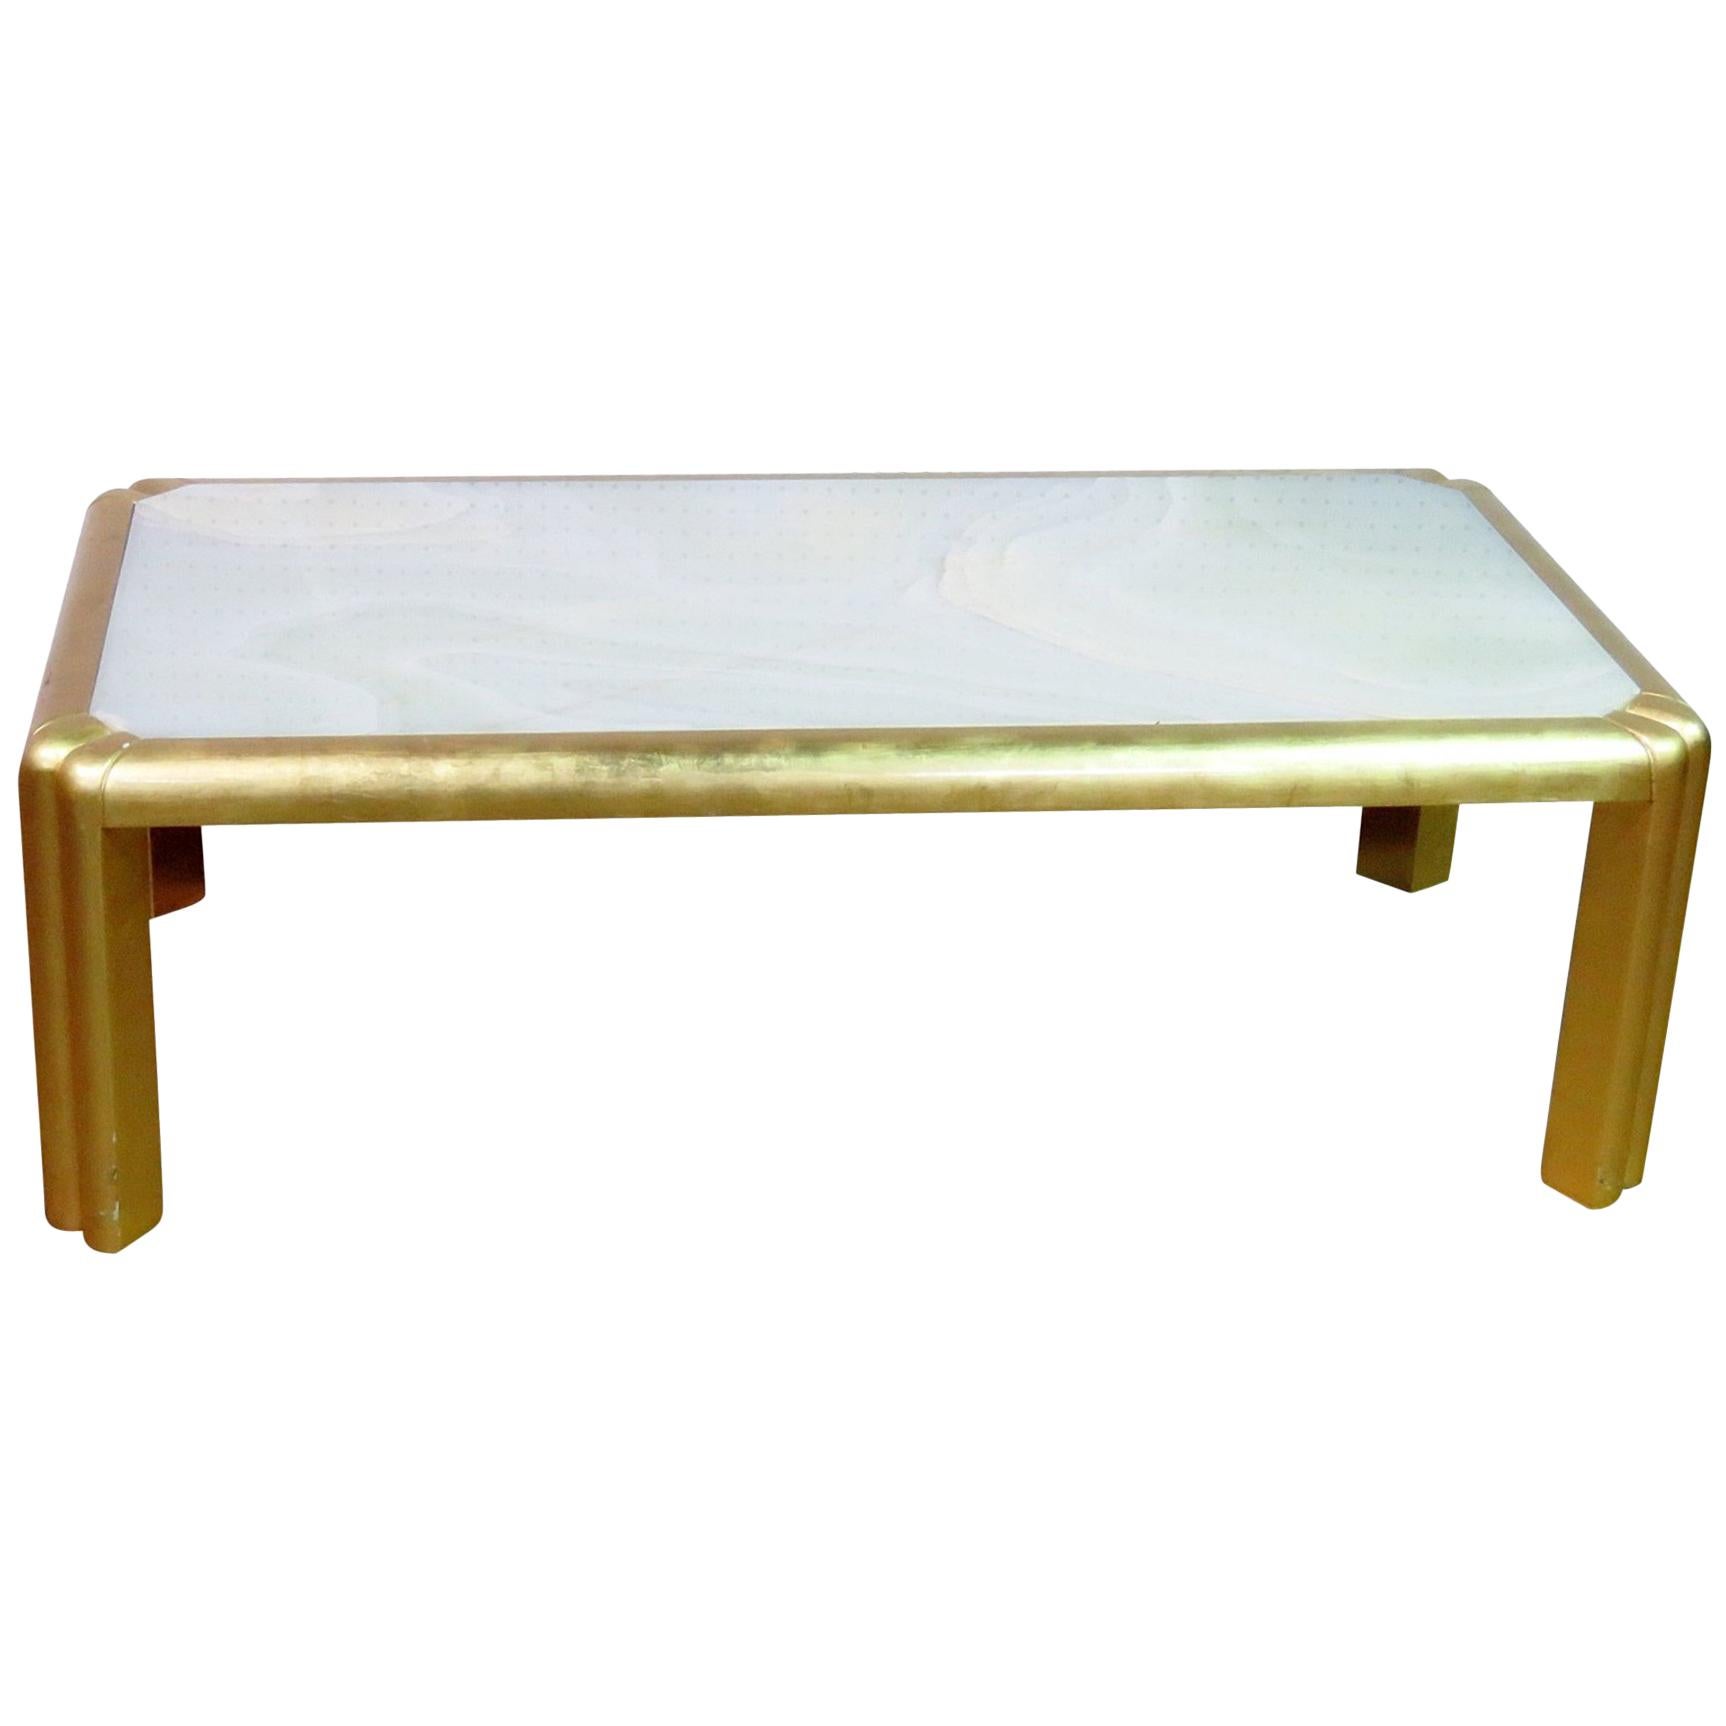 French Gilded Marble Top Skyscraper Style Art Deco Coffee Cocktail Table